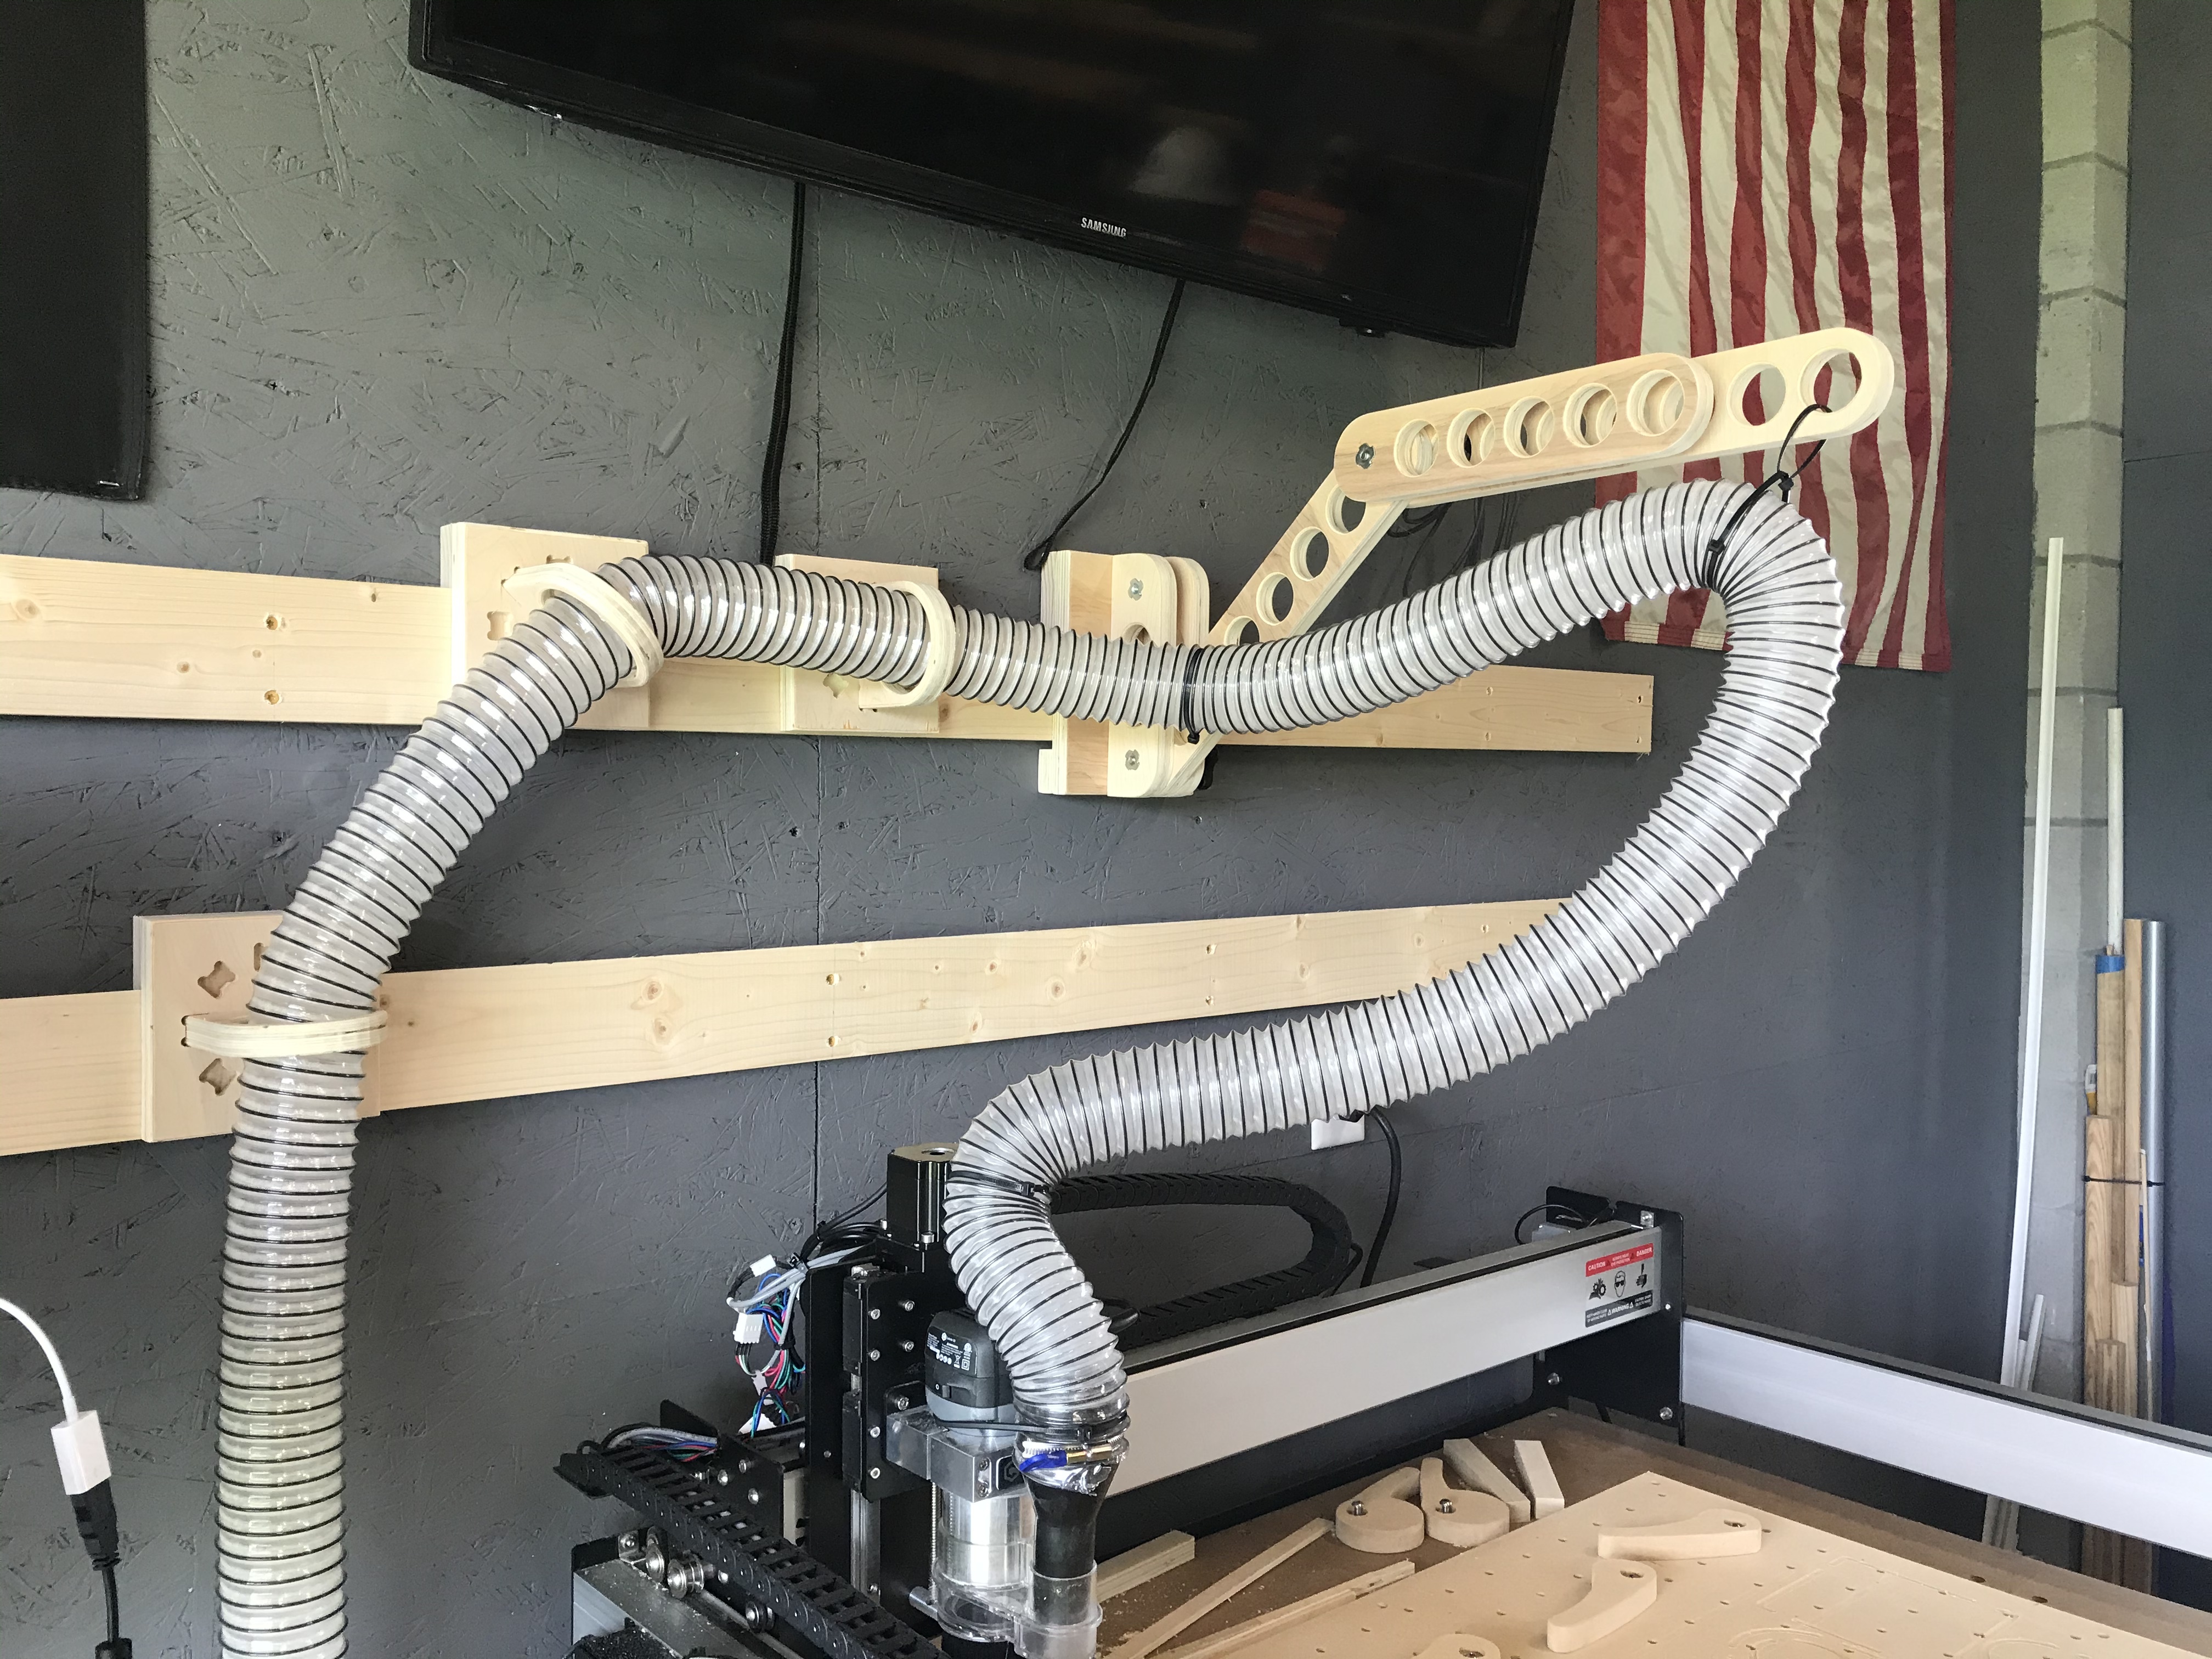 Details about   LUNG SAVER Dust Collection System for Shapeoko CNC for TrueZ Owners 3D Printed 